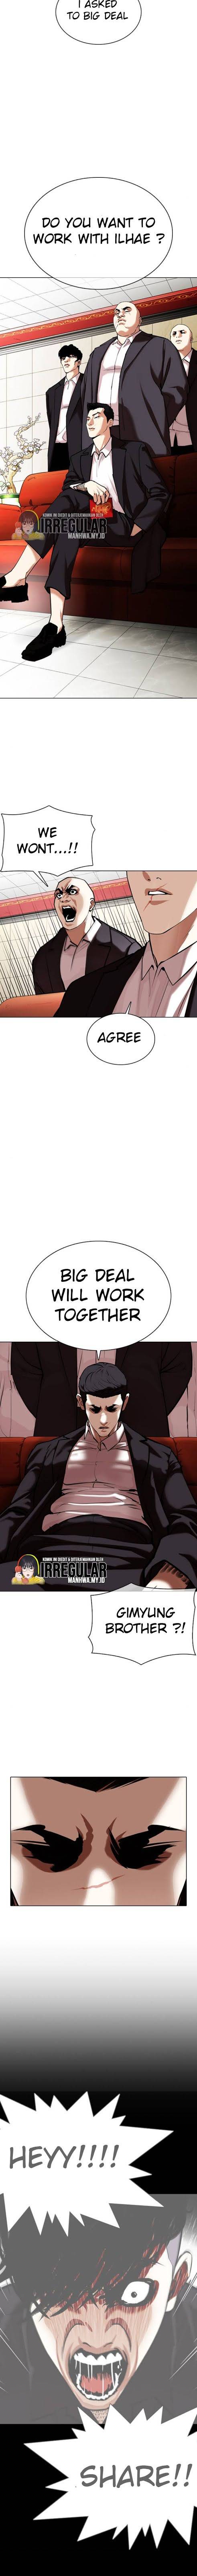 Lookism, Chapter 349